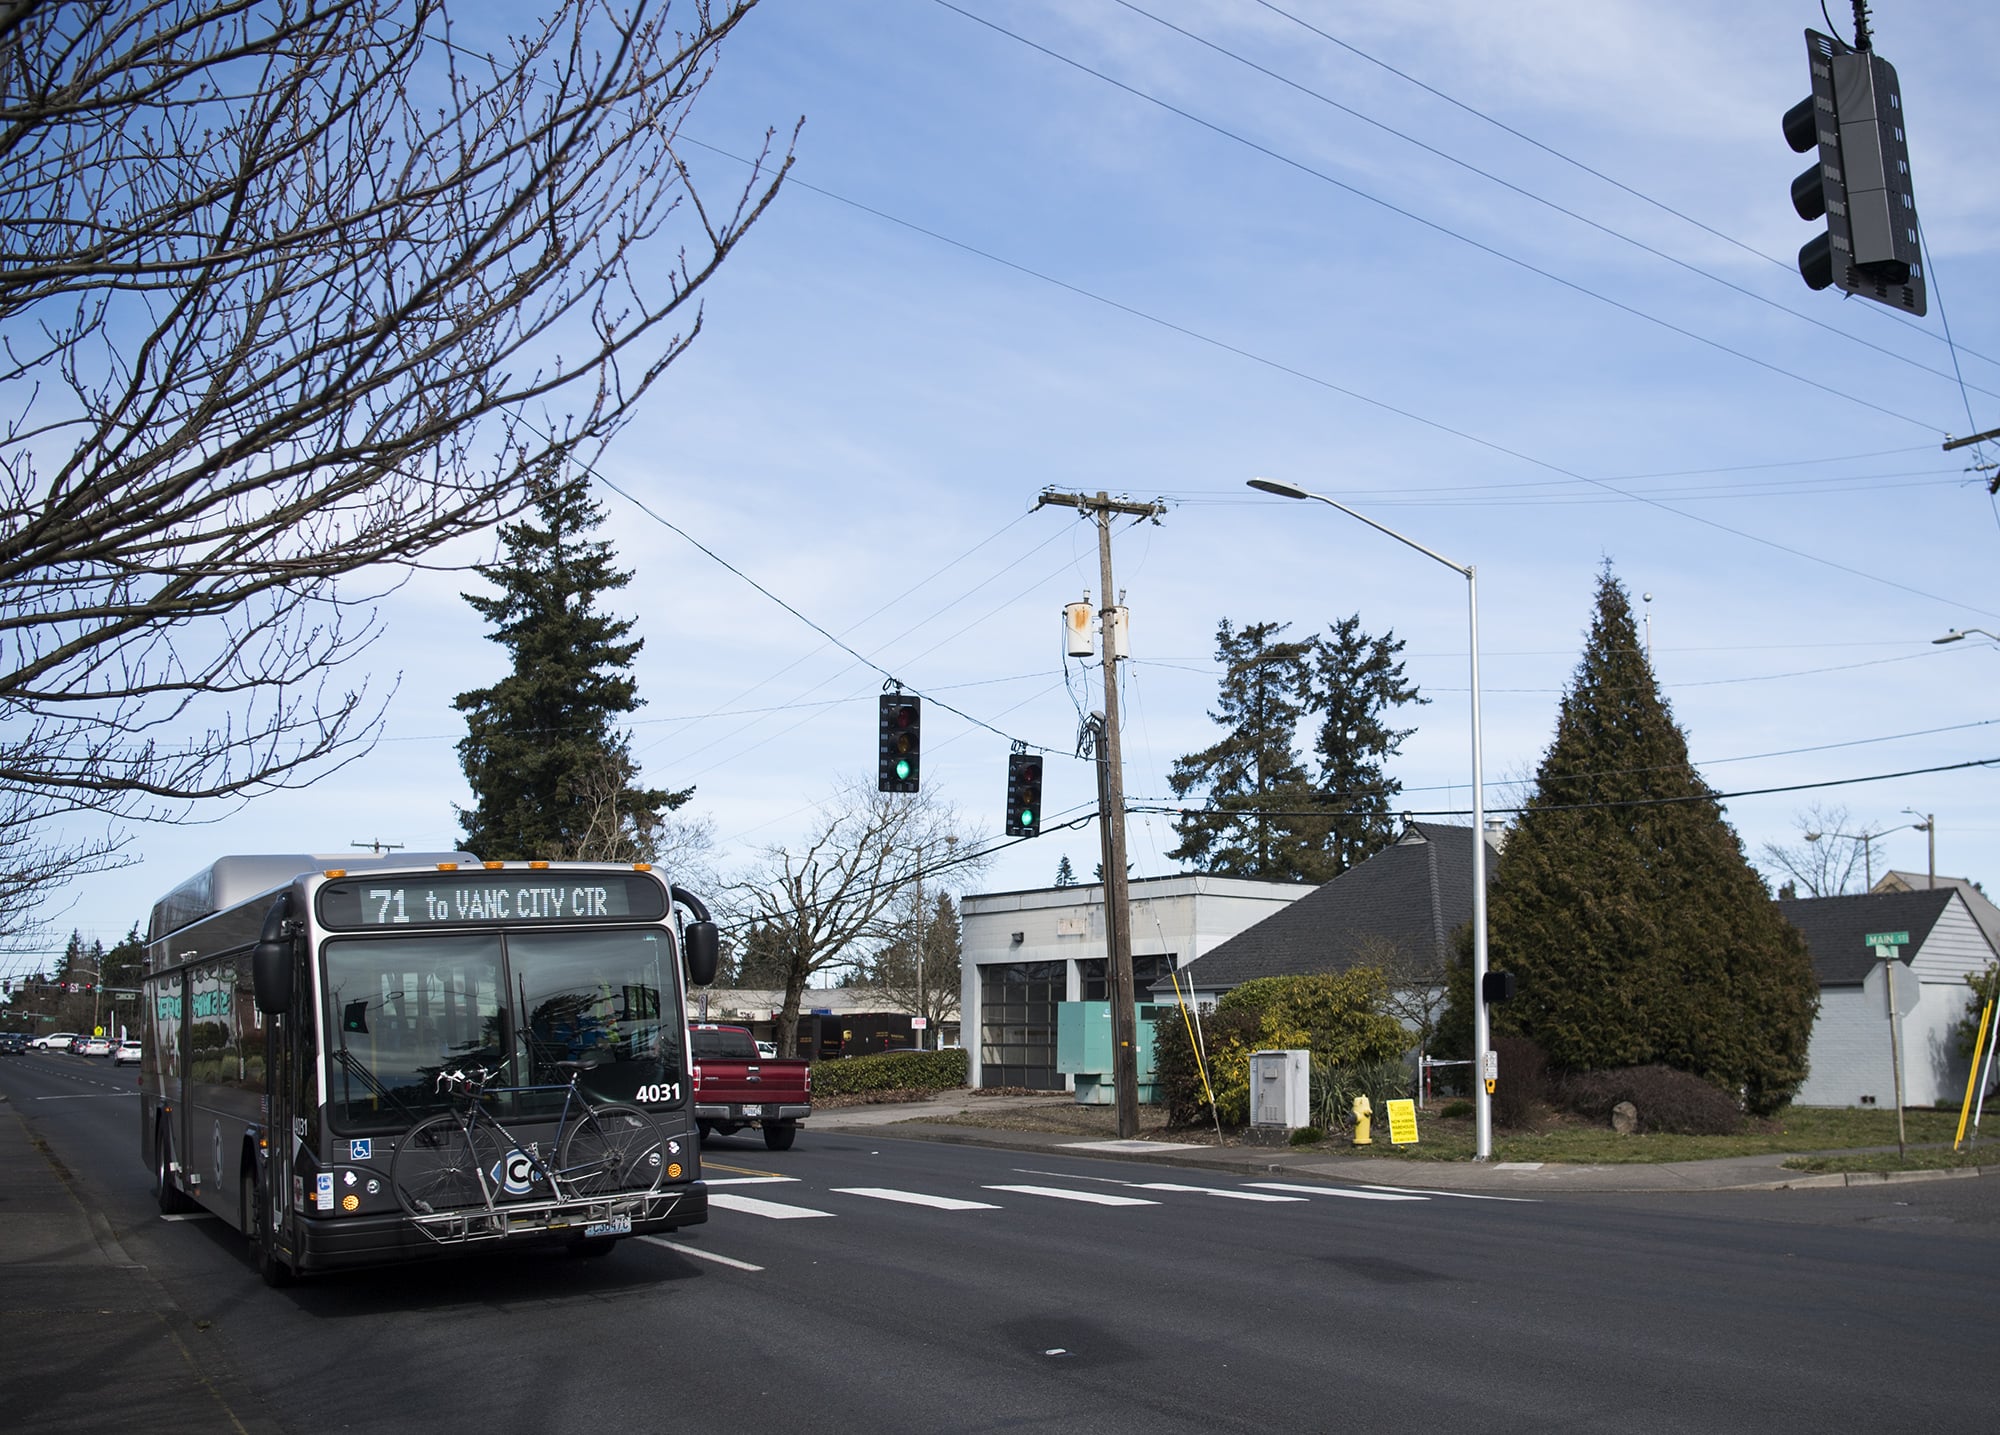 A C-Tran bus makes its way down East 33rd Street in Vancouver on Tuesday.